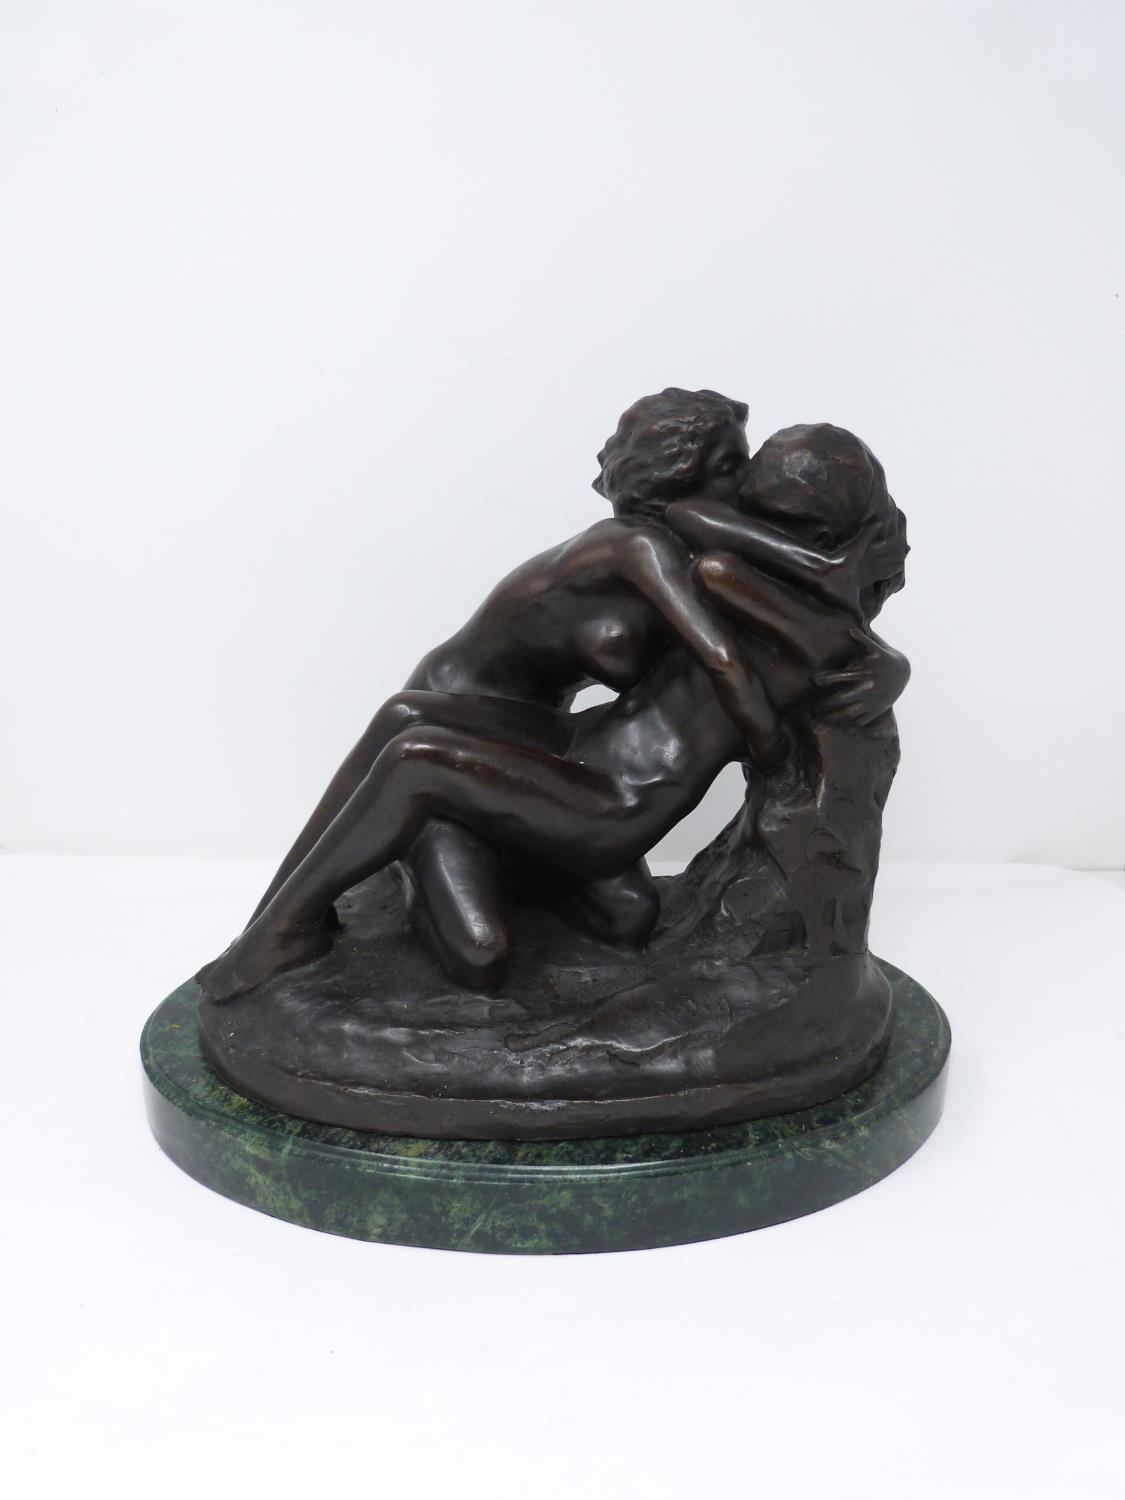 A bronze sculpture after Rodin's 'The Metamorphosis of Ovid' mounted on a green serpentine base.